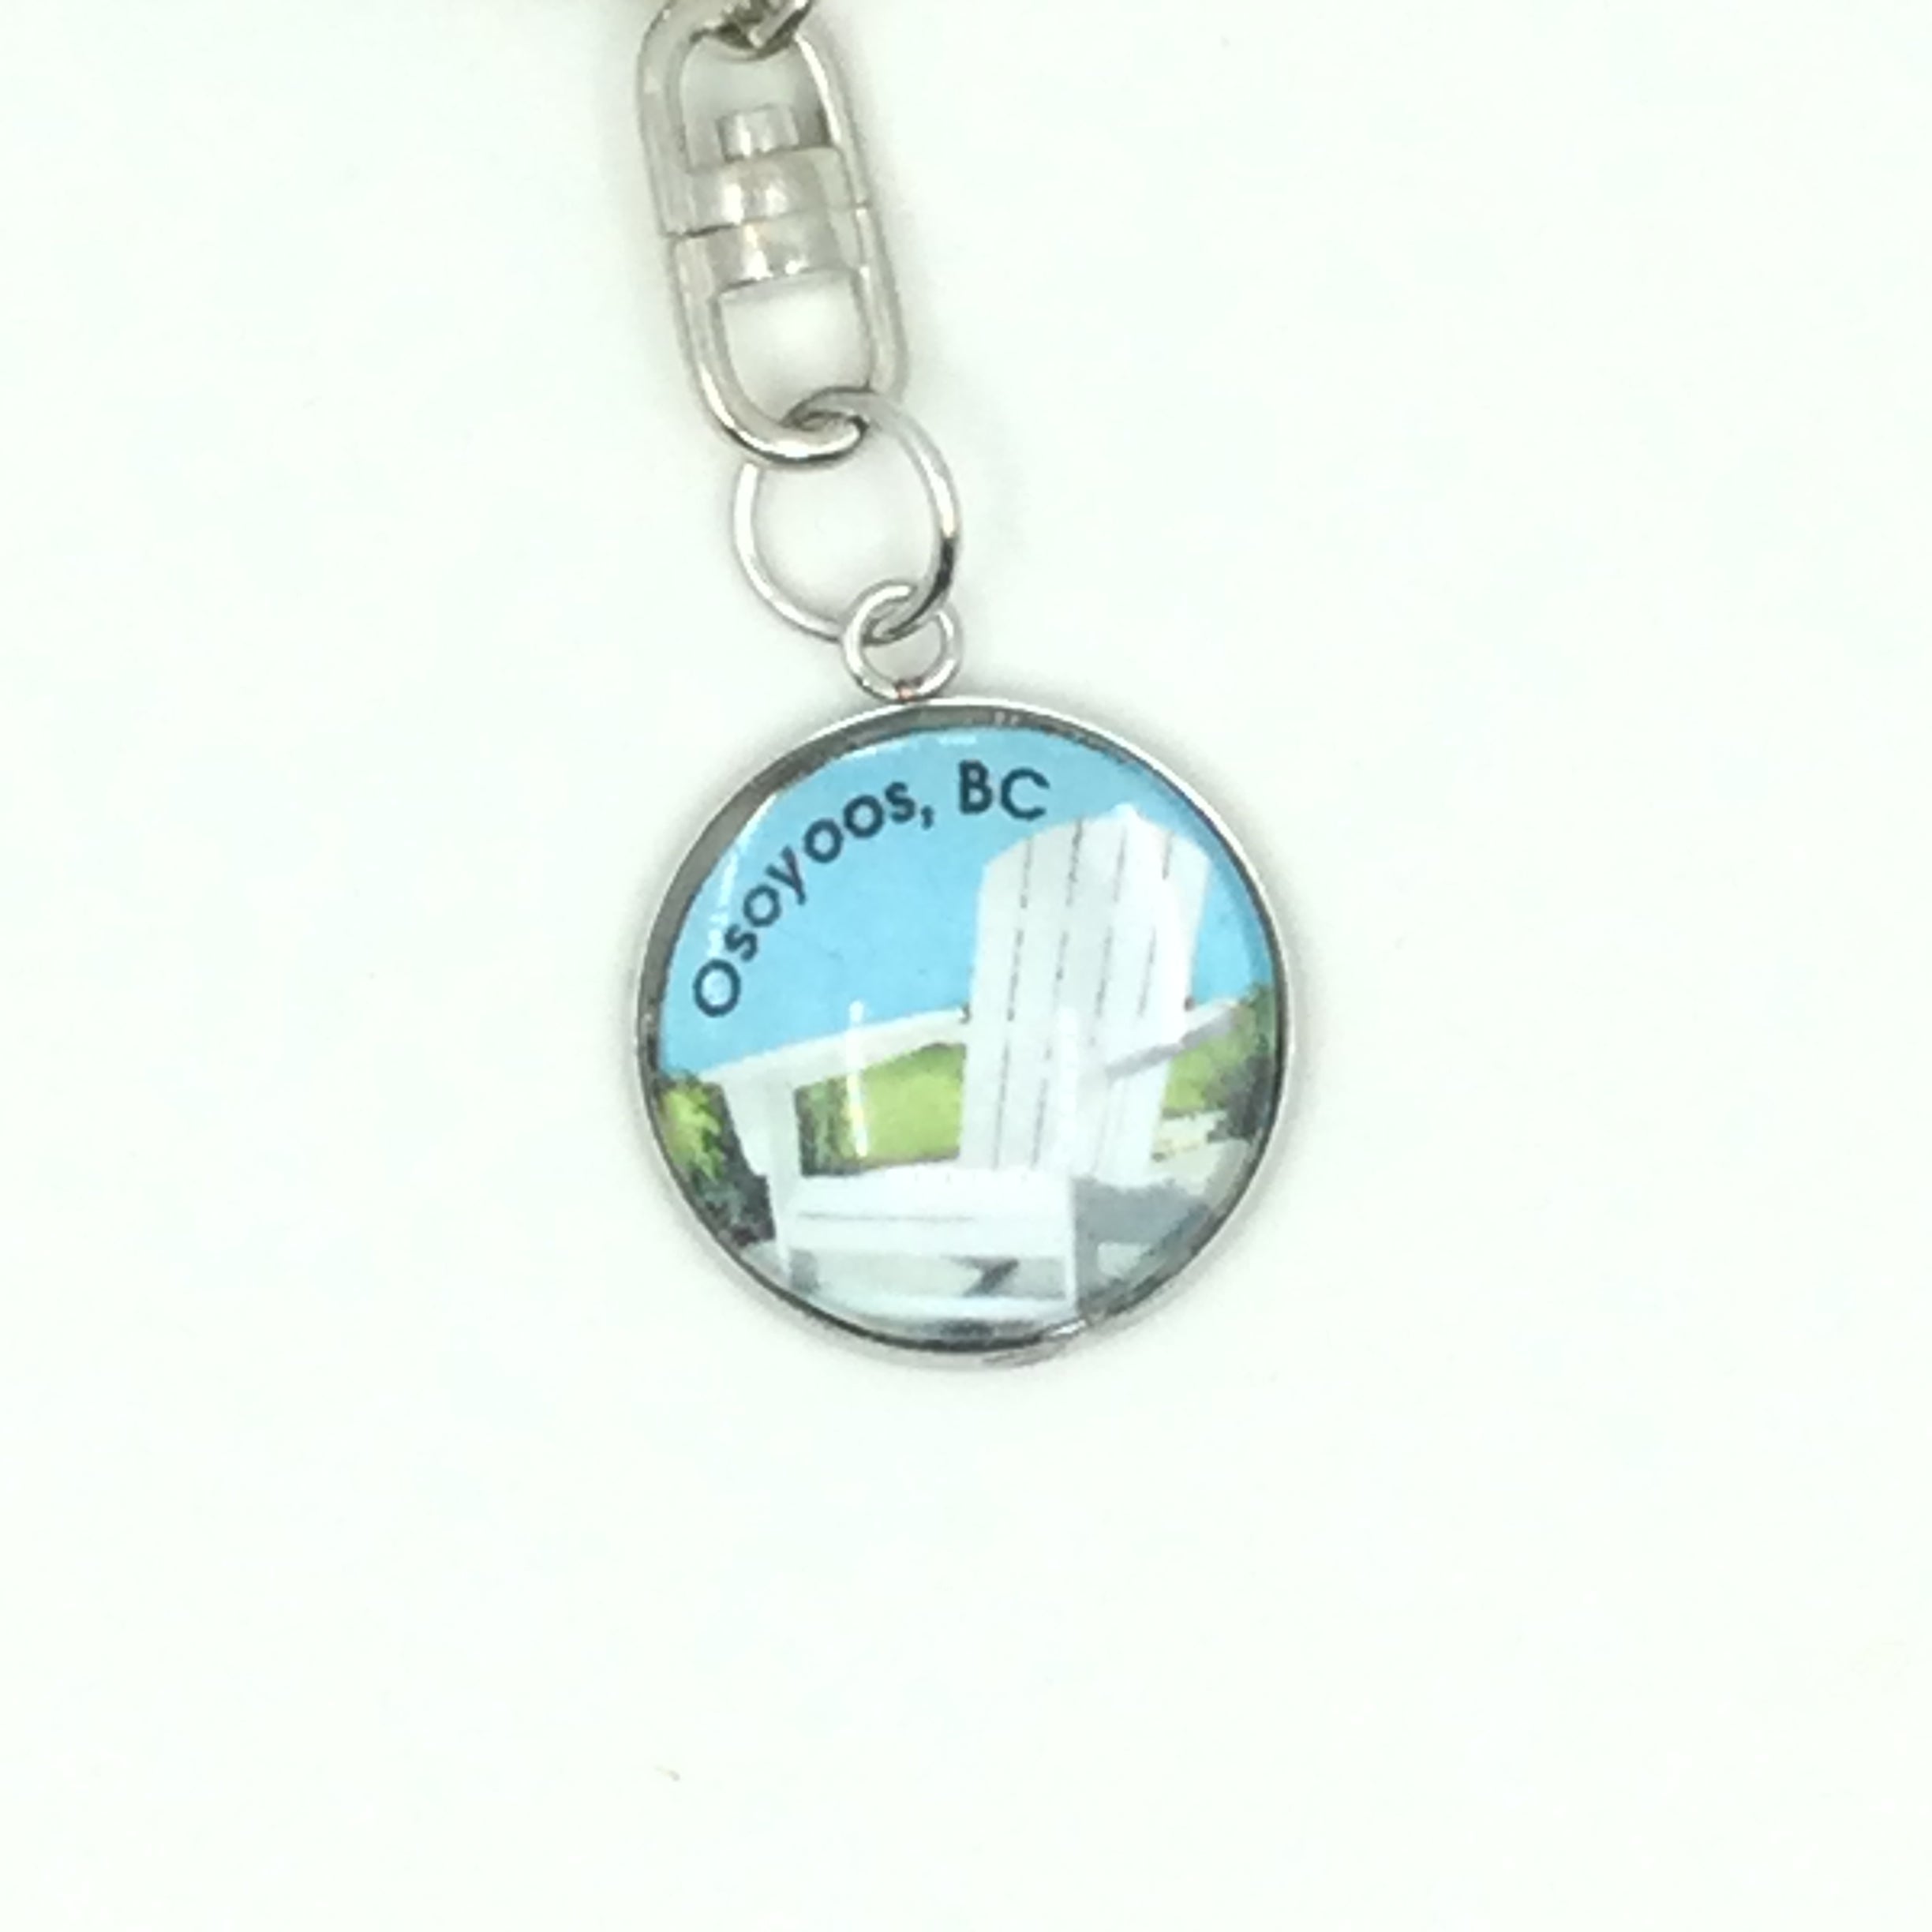 Osoyoos Picture Keychain